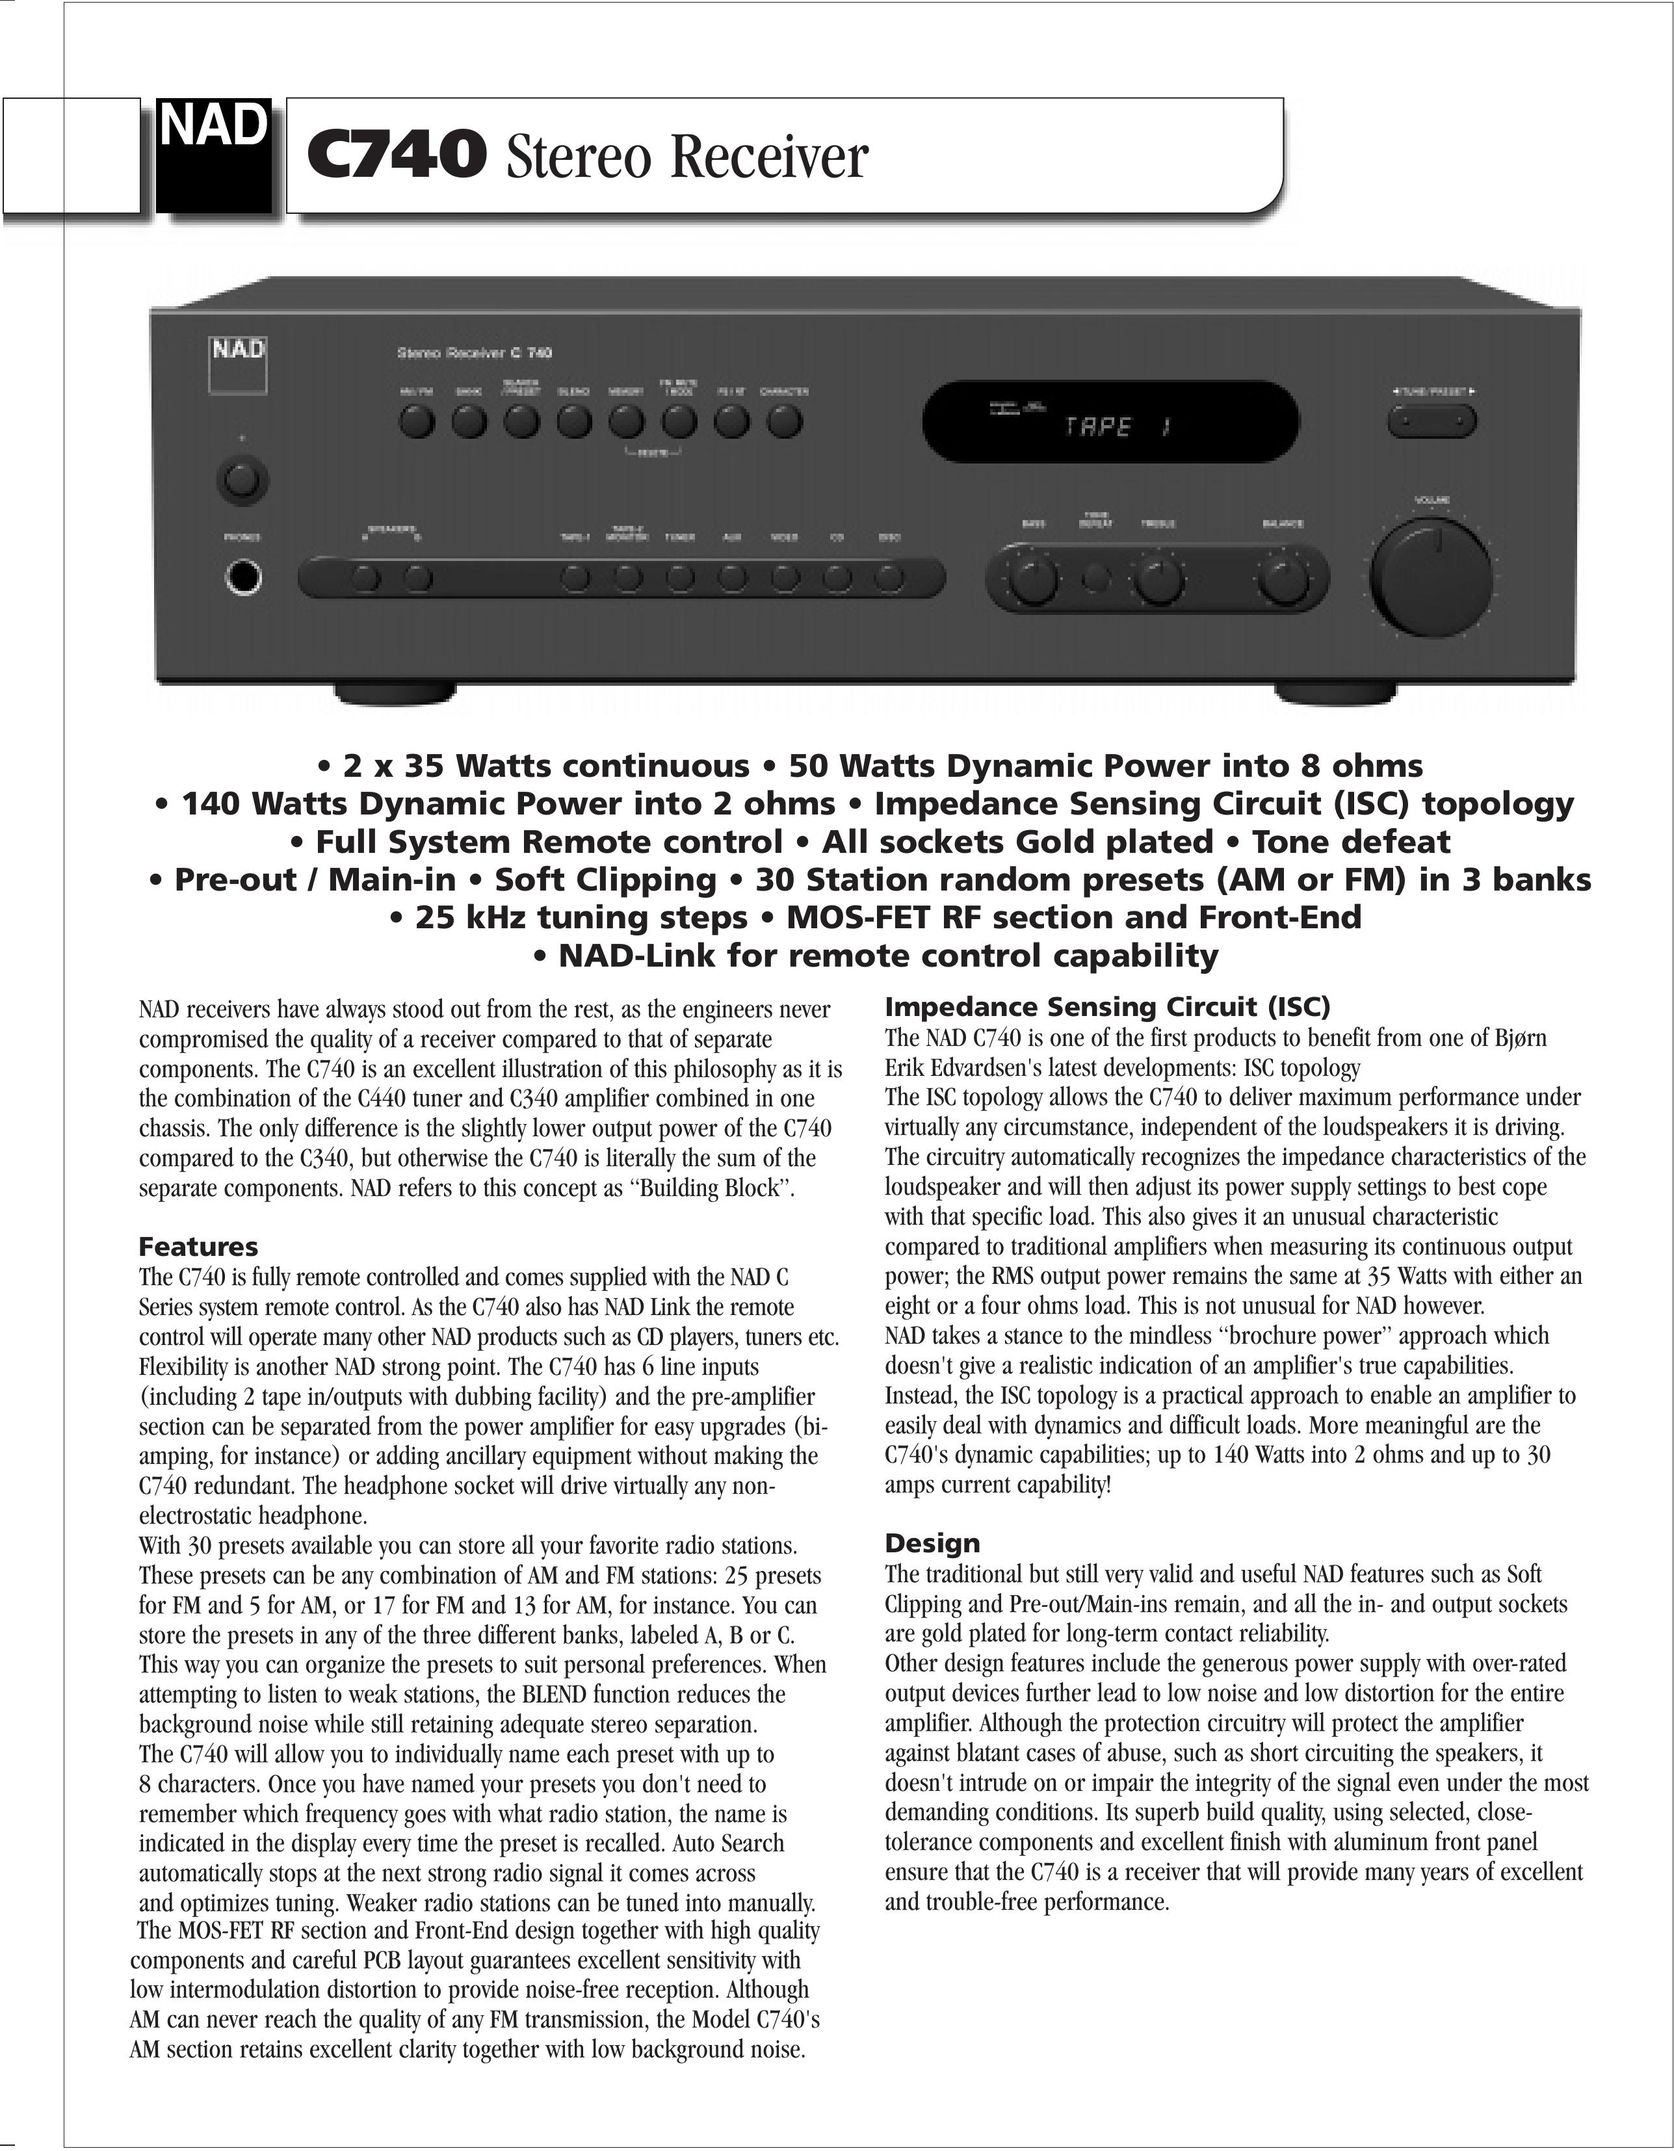 NAD C740 Stereo Receiver User Manual